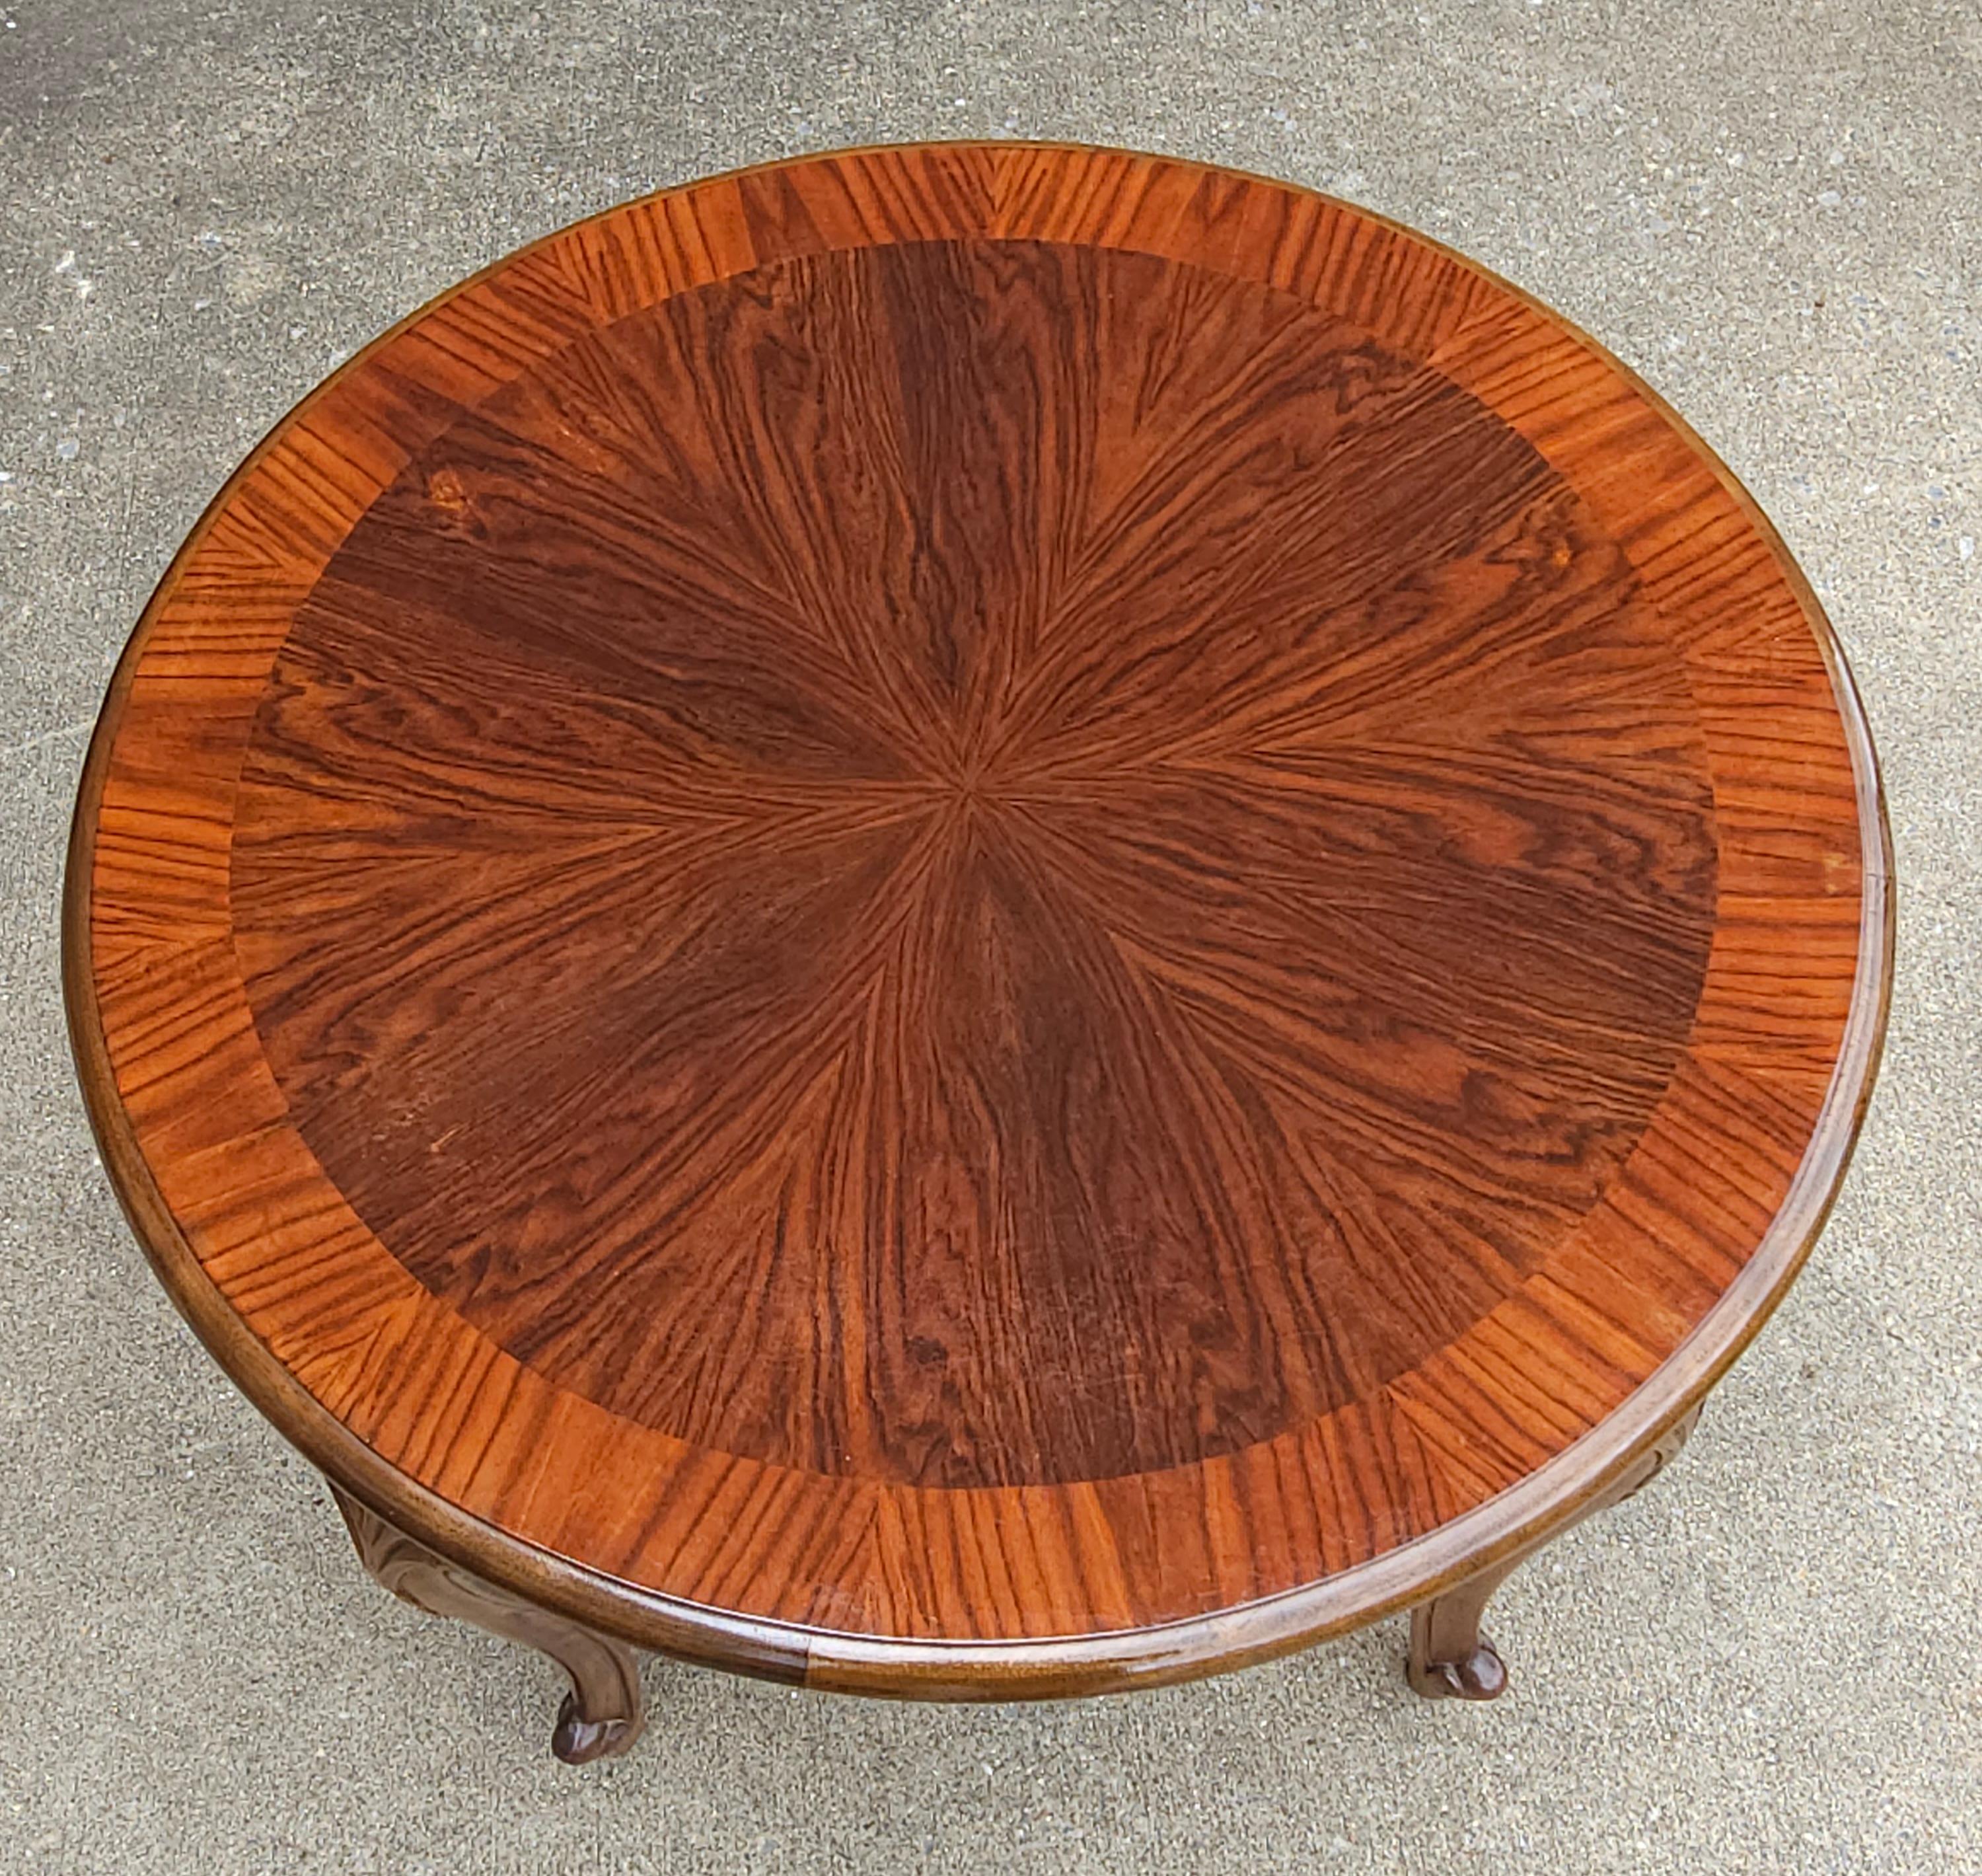 A very fine handcrafted Brazilian Rosewood Gueridon Table. Brazilian Rosewood is one of the rarest, most sought after Rosewoods in the World. Brazilian Rosewood is renowned for its colorfully patterned grain. Brazilian Rosewood works and glues well,